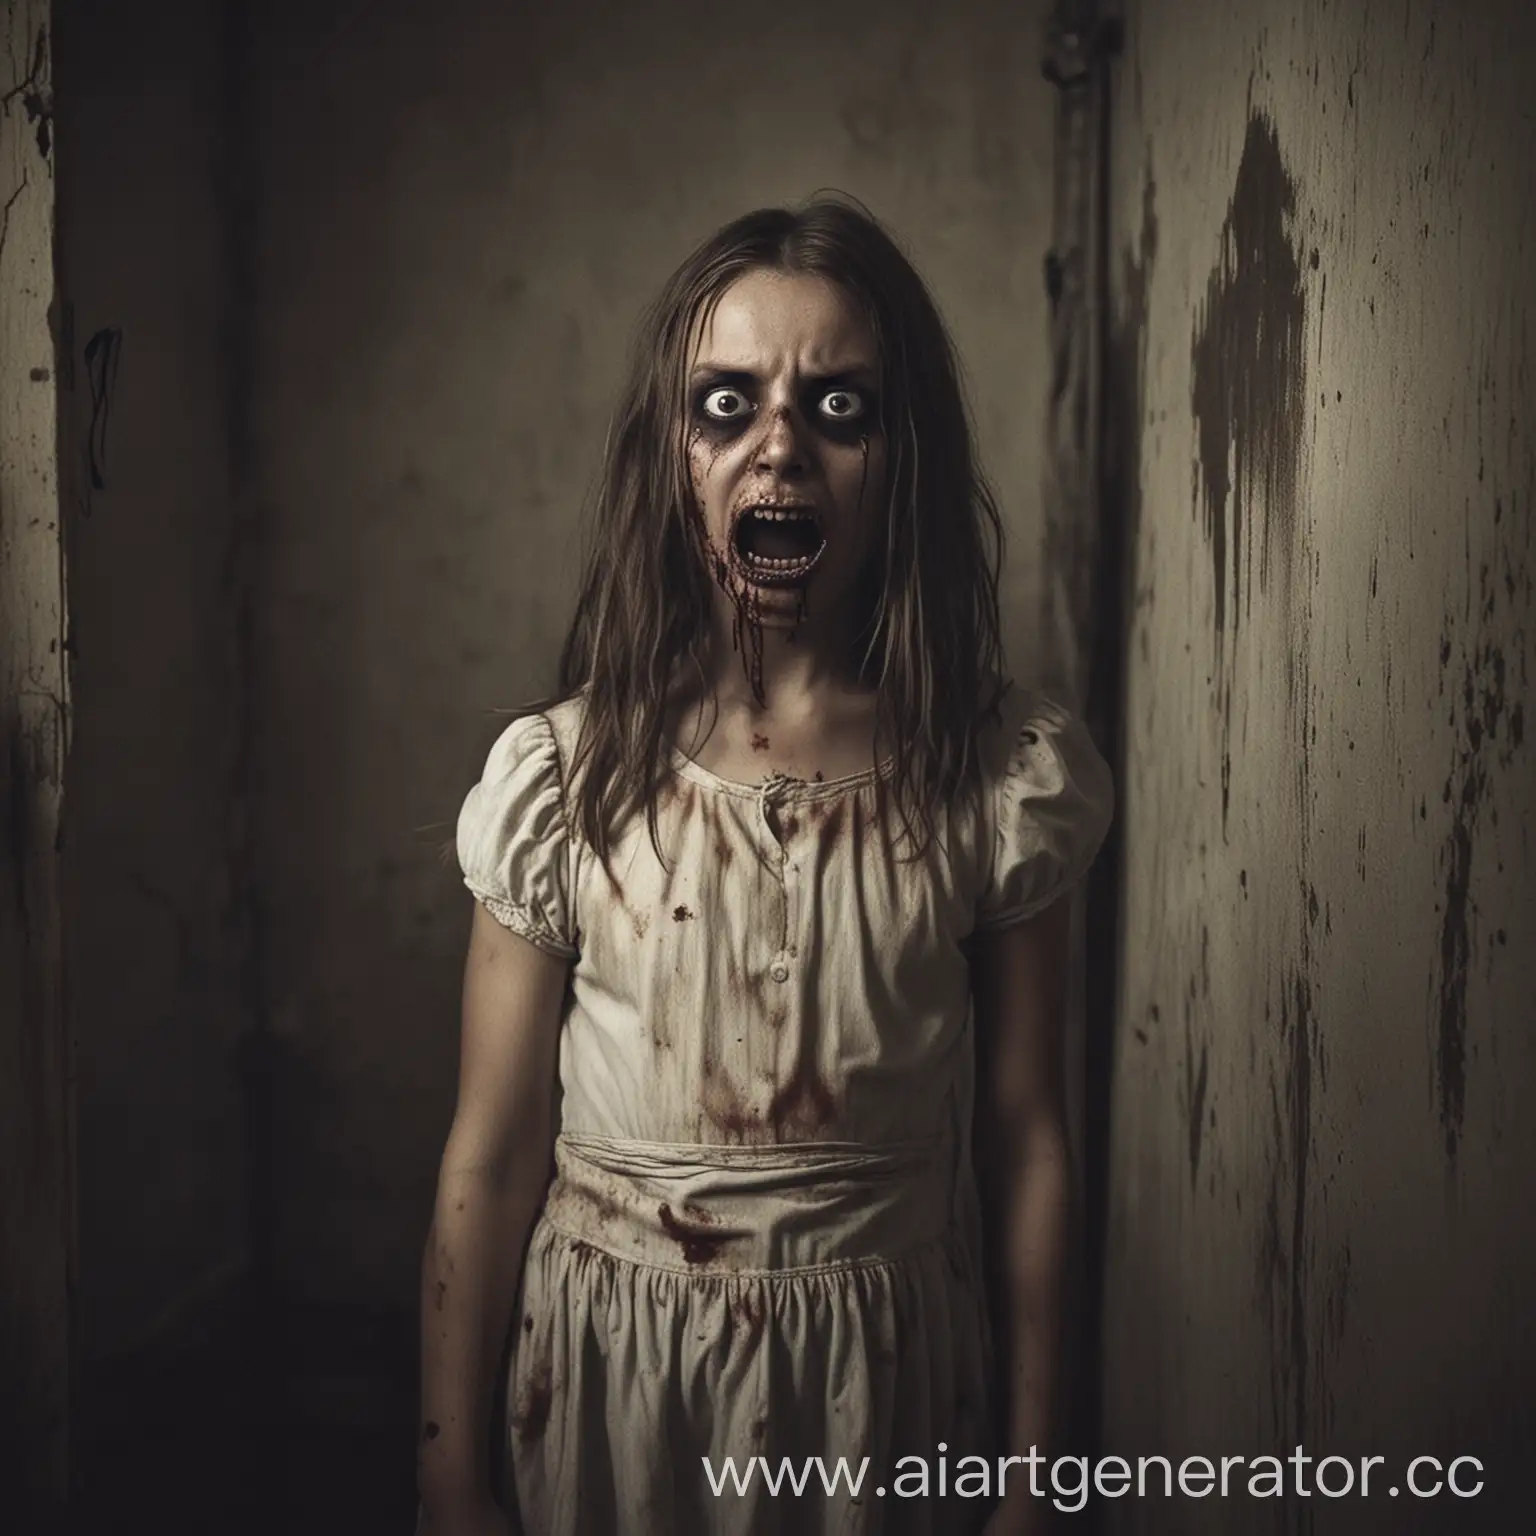 Eerie-Nightmares-Collection-of-Creepy-Imagery-for-ThrillSeekers